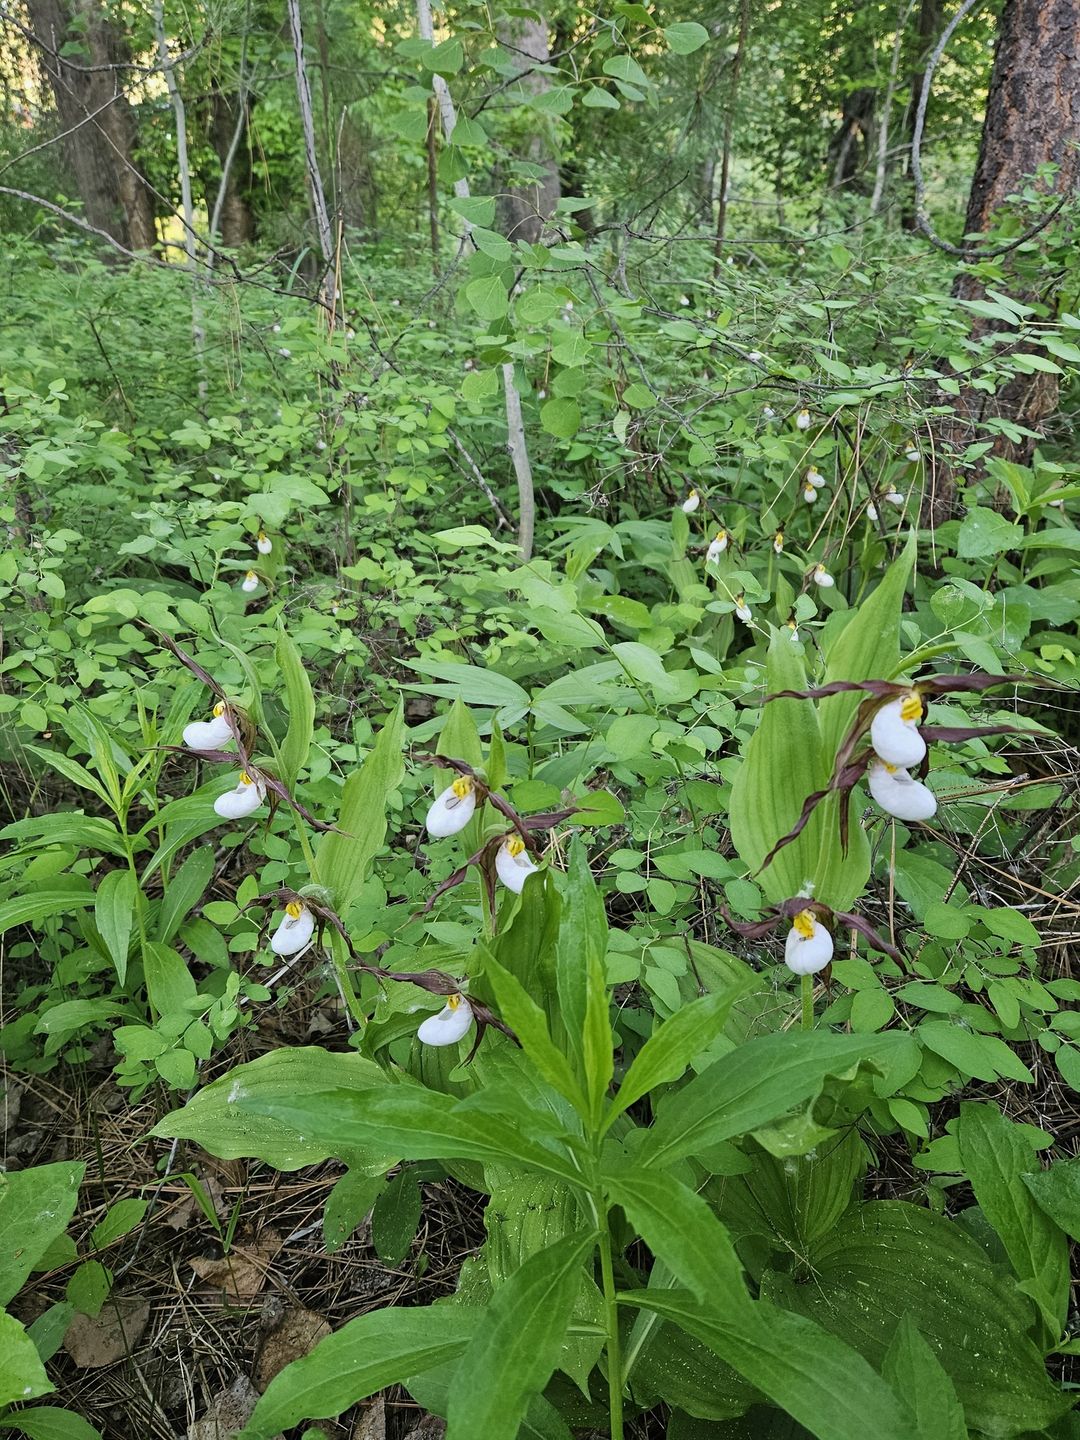 mountain lady's slipper orchid